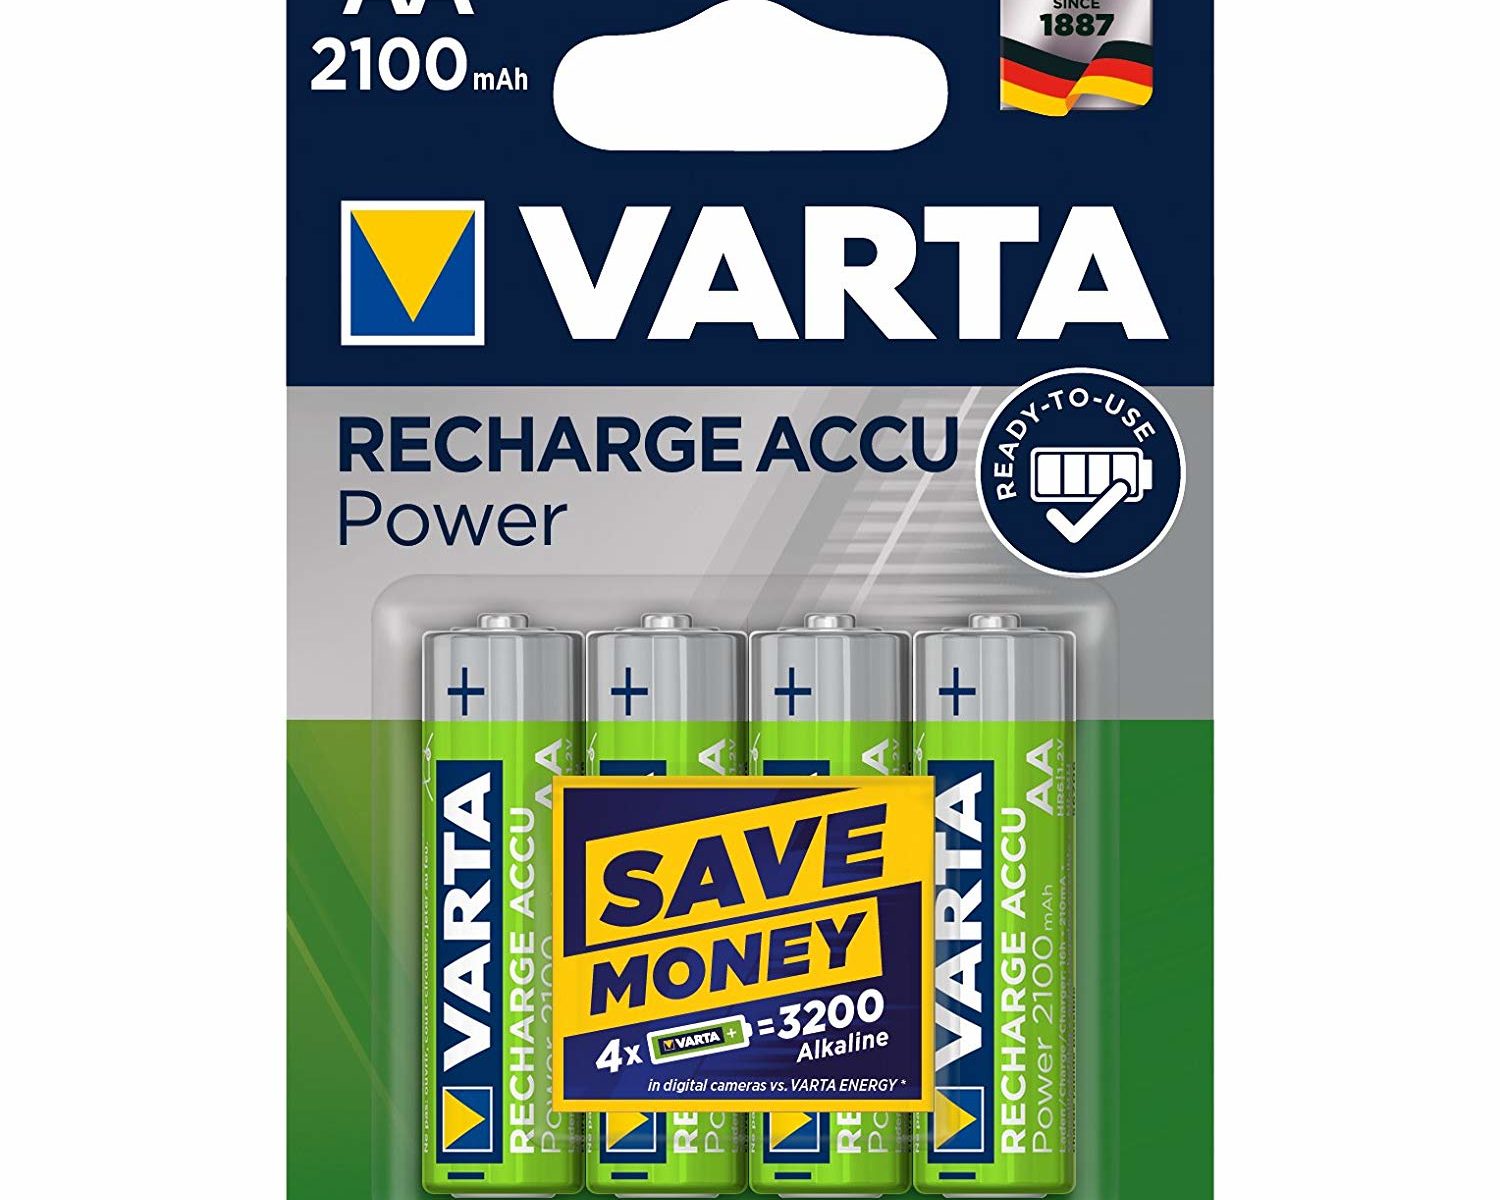 Varta Rechargeable Accu Ready2Use